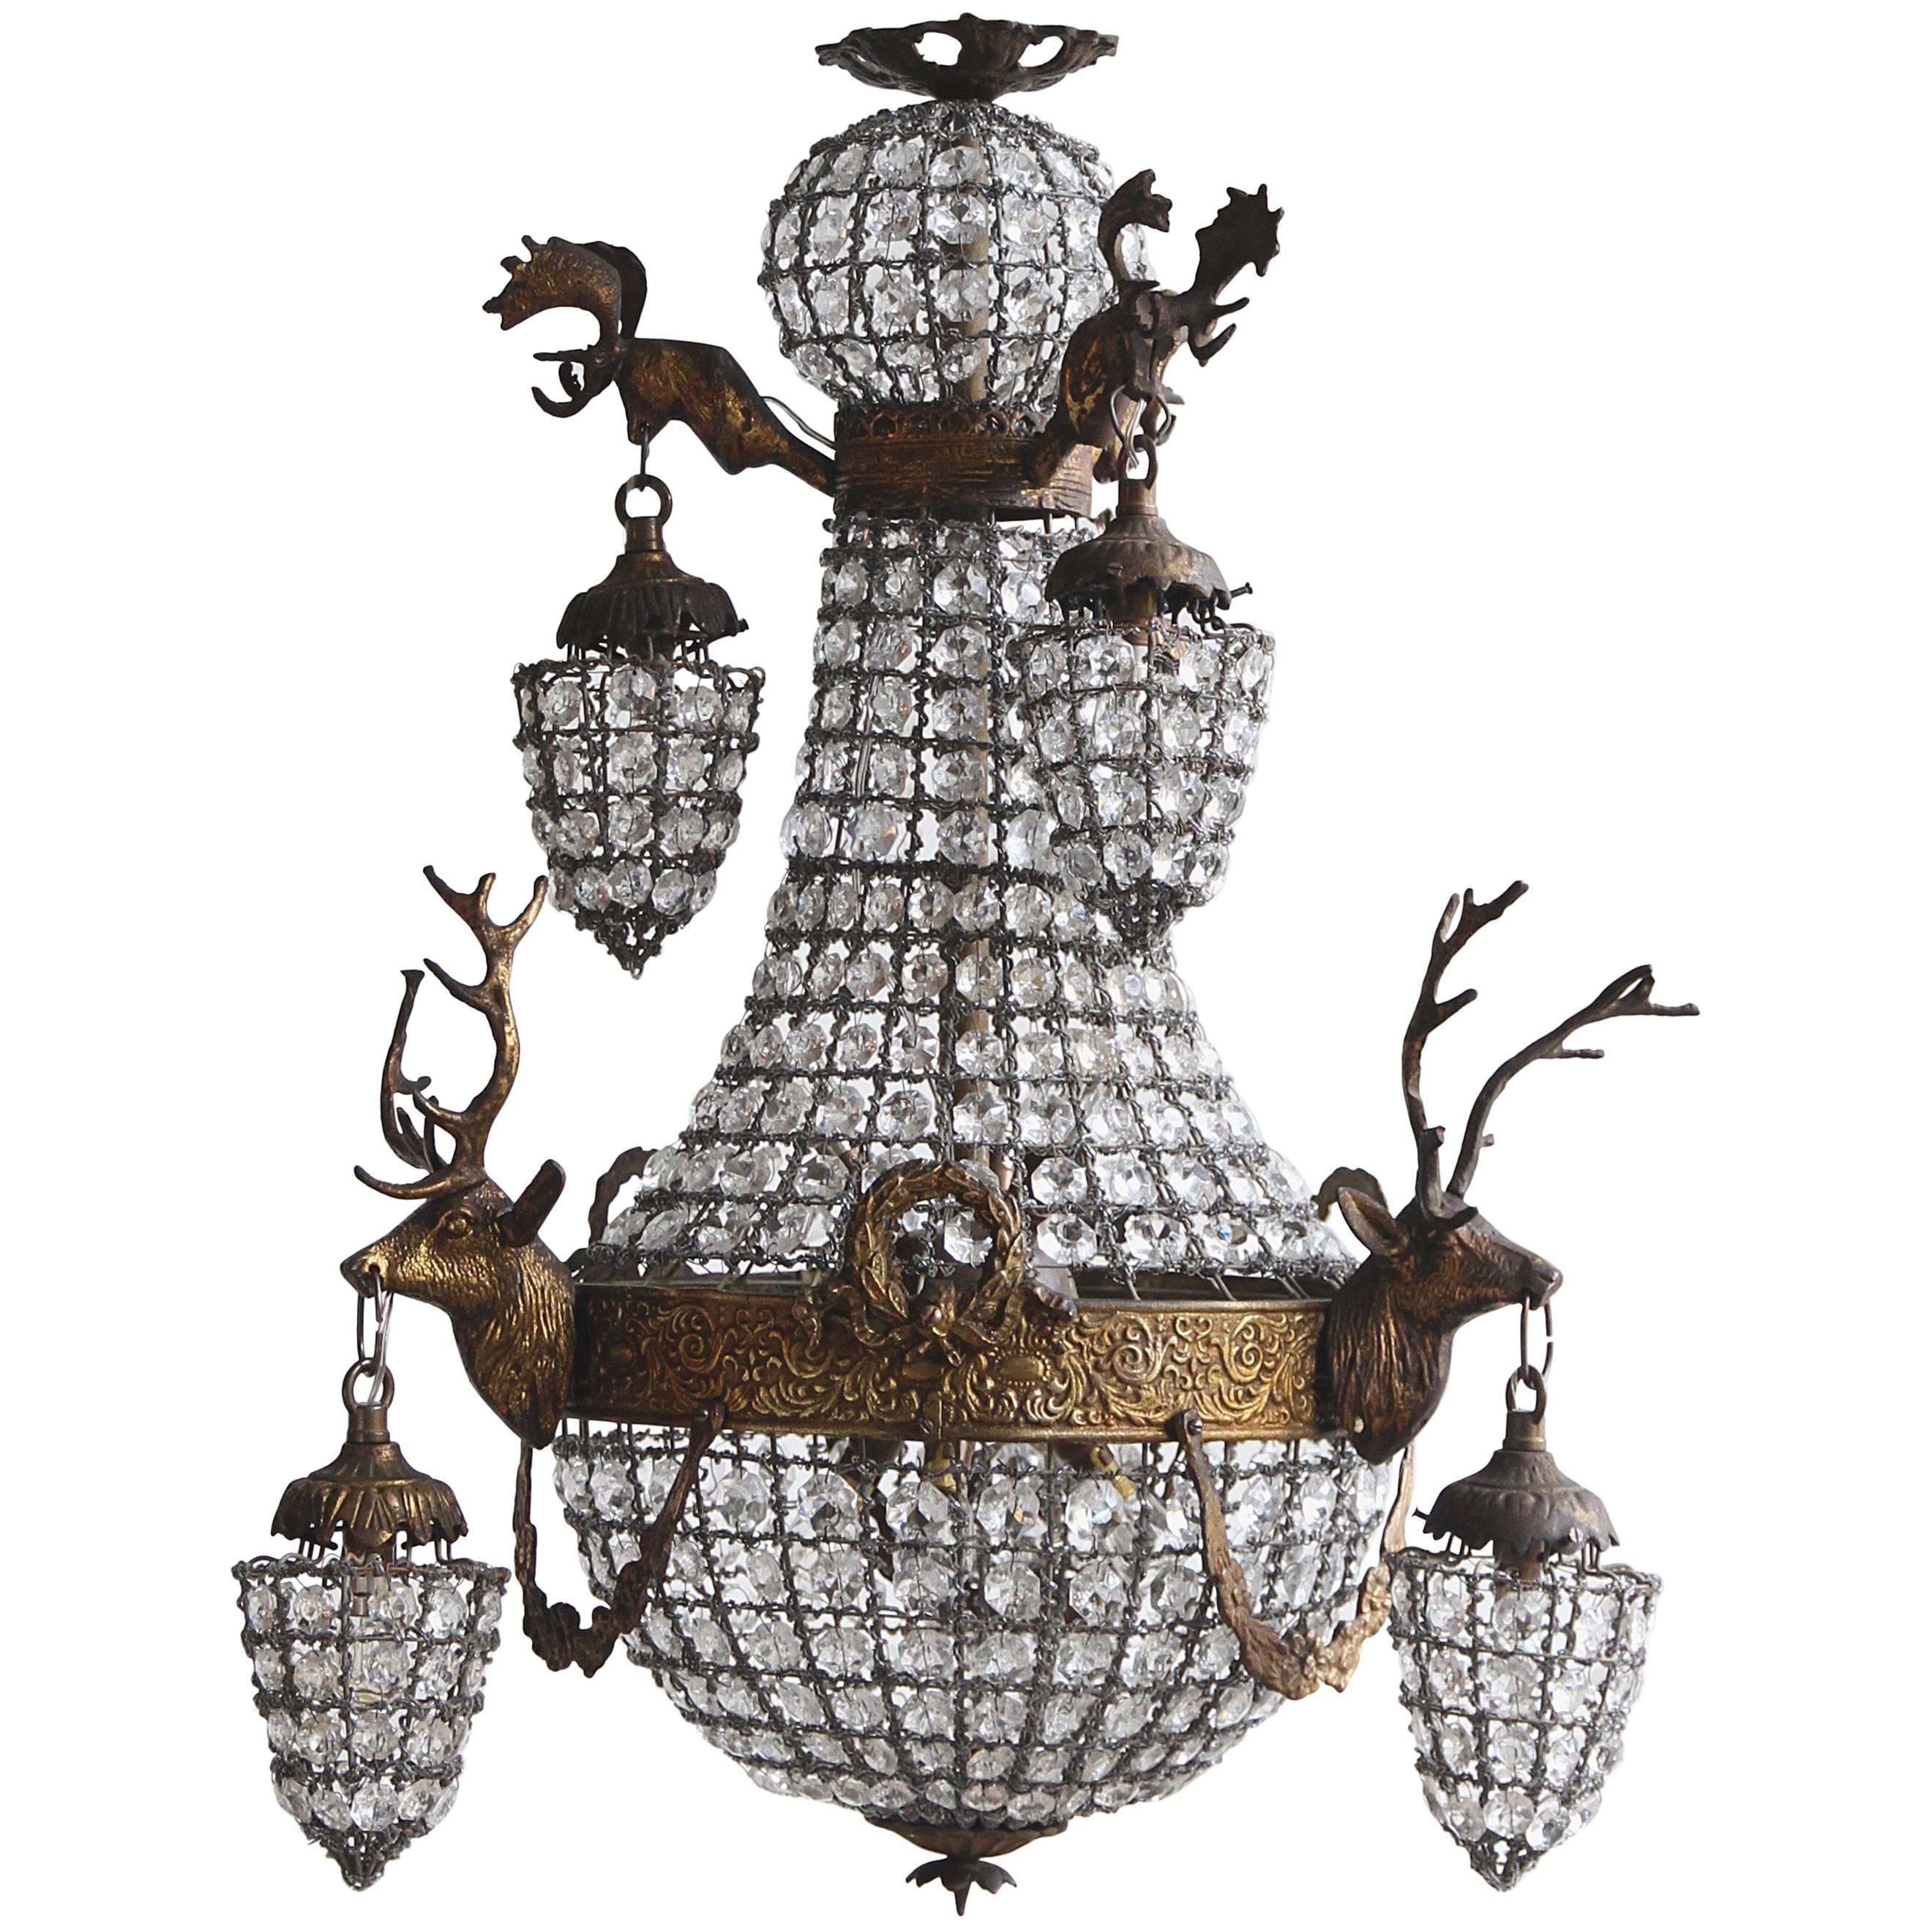 1930s French Brass Empire Balloon Chandelier with Stags Head Sconces